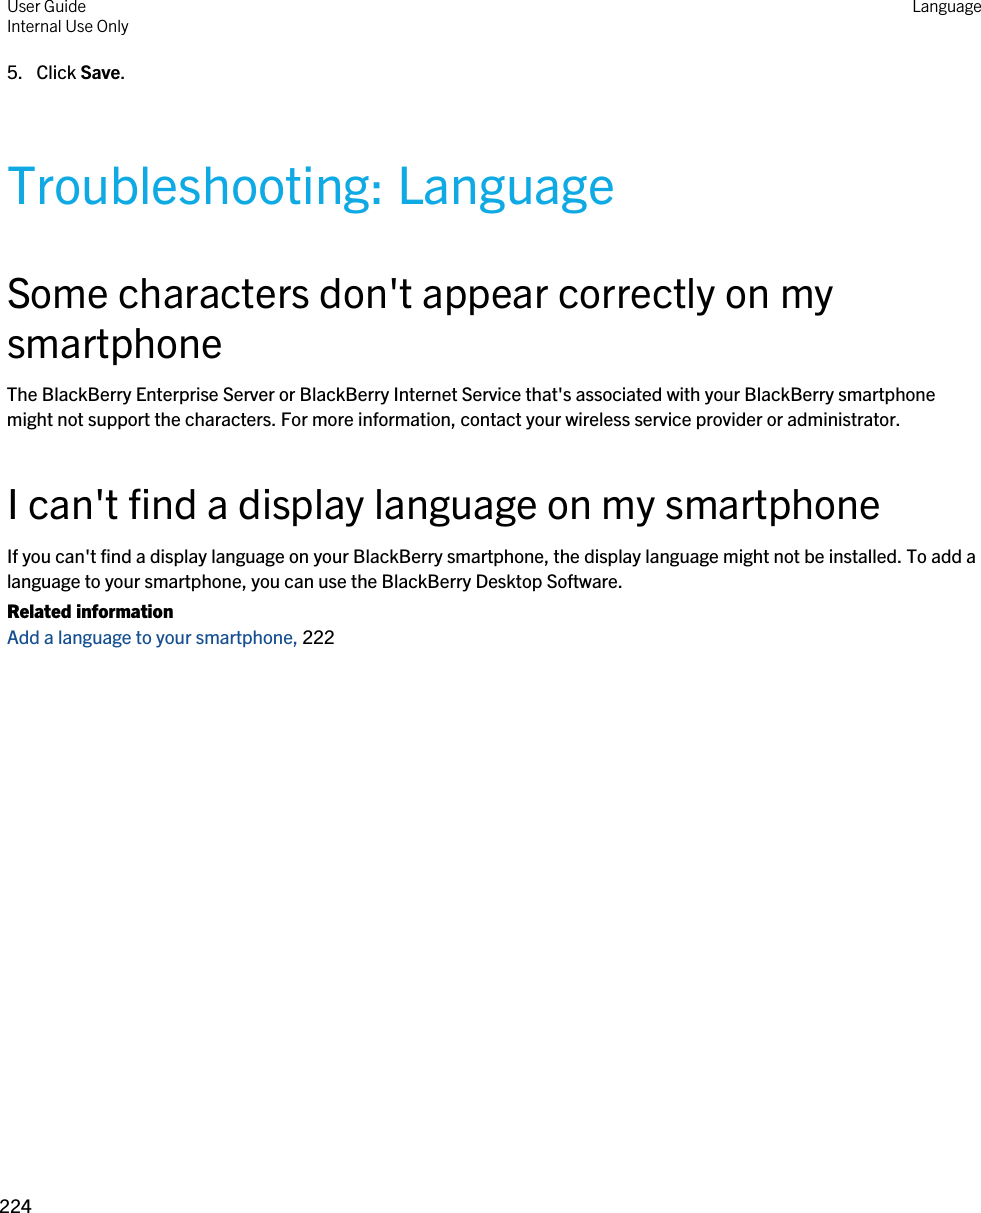 5. Click Save.Troubleshooting: LanguageSome characters don&apos;t appear correctly on my smartphoneThe BlackBerry Enterprise Server or BlackBerry Internet Service that&apos;s associated with your BlackBerry smartphone might not support the characters. For more information, contact your wireless service provider or administrator.I can&apos;t find a display language on my smartphoneIf you can&apos;t find a display language on your BlackBerry smartphone, the display language might not be installed. To add a language to your smartphone, you can use the BlackBerry Desktop Software.Related informationAdd a language to your smartphone, 222 User GuideInternal Use Only Language224 